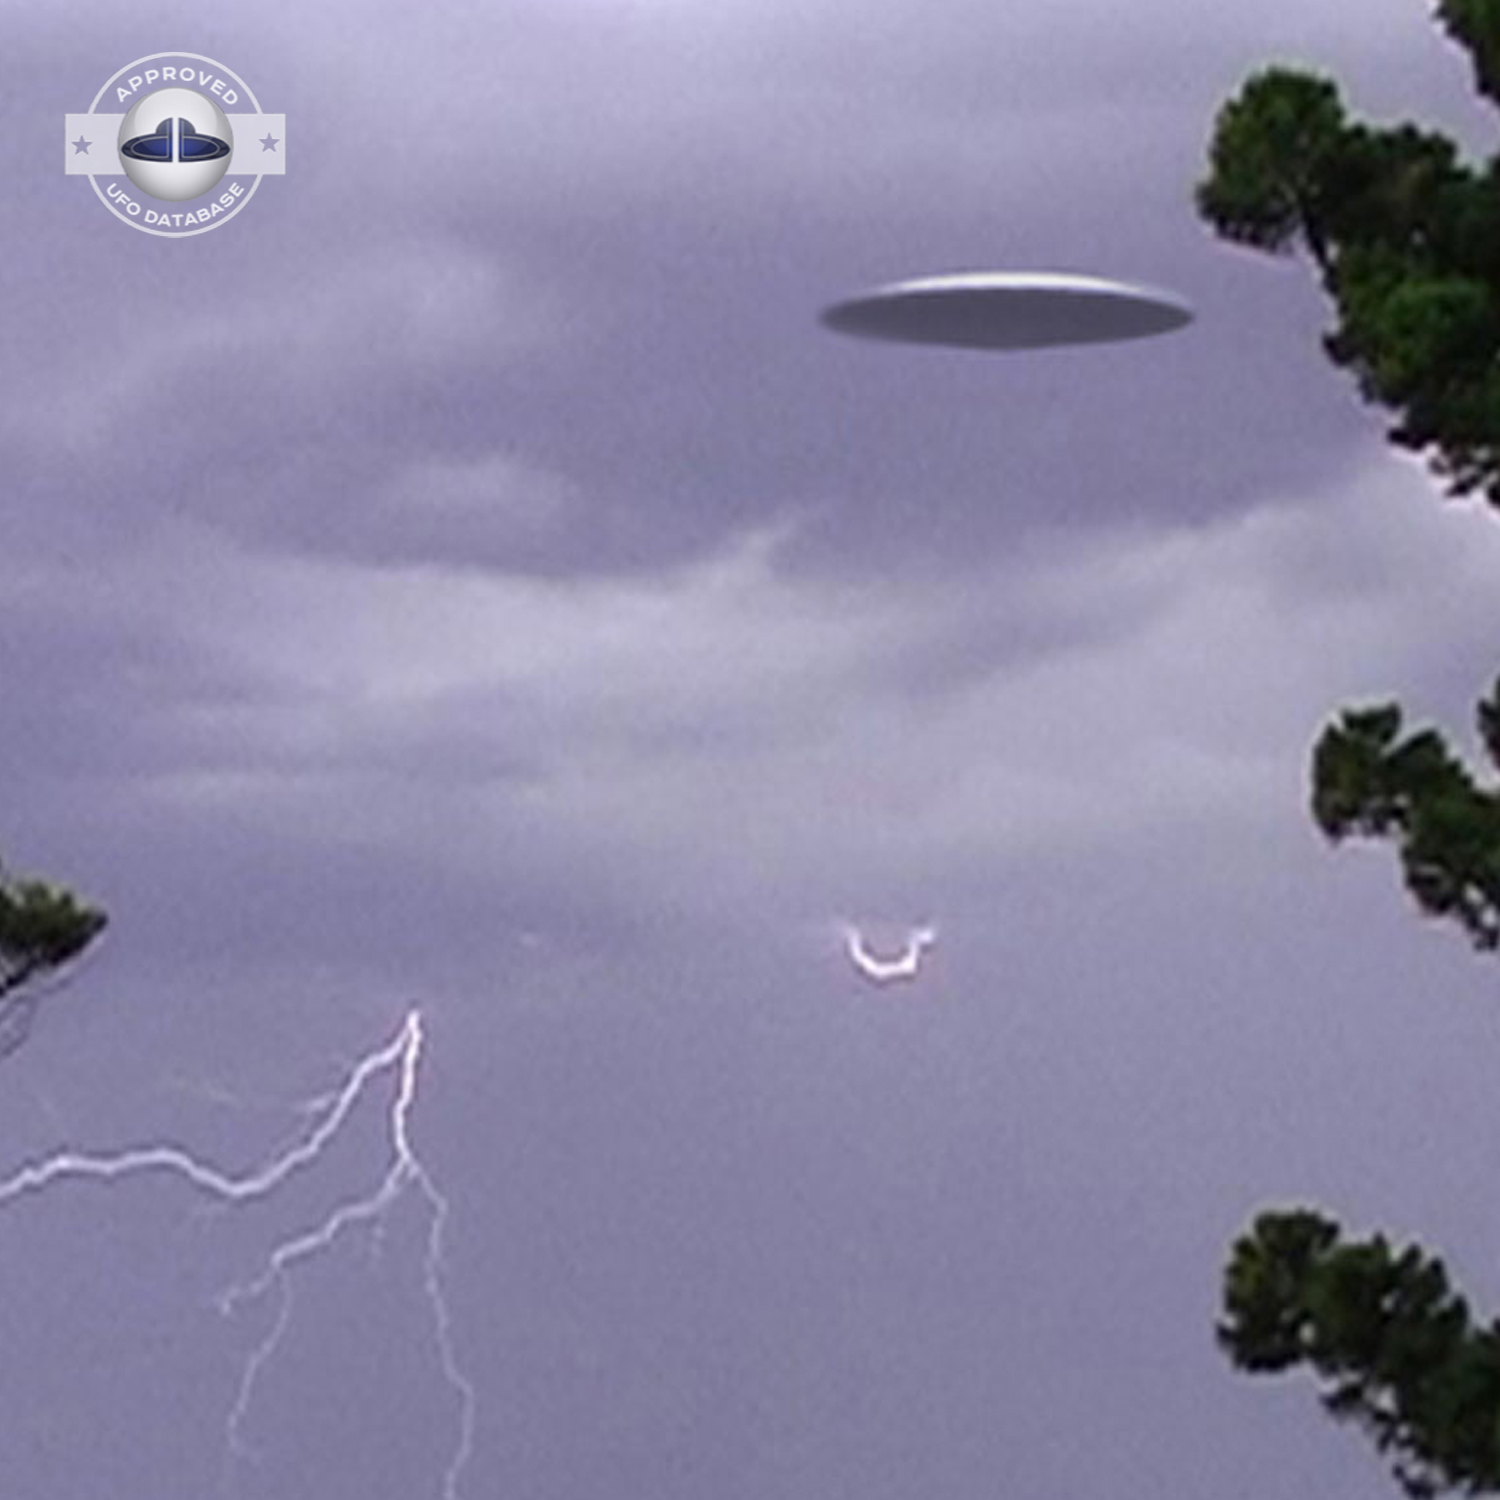 UFO picture showing a flat flying saucer in thunderstorm. Geelong UFO Picture #61-3